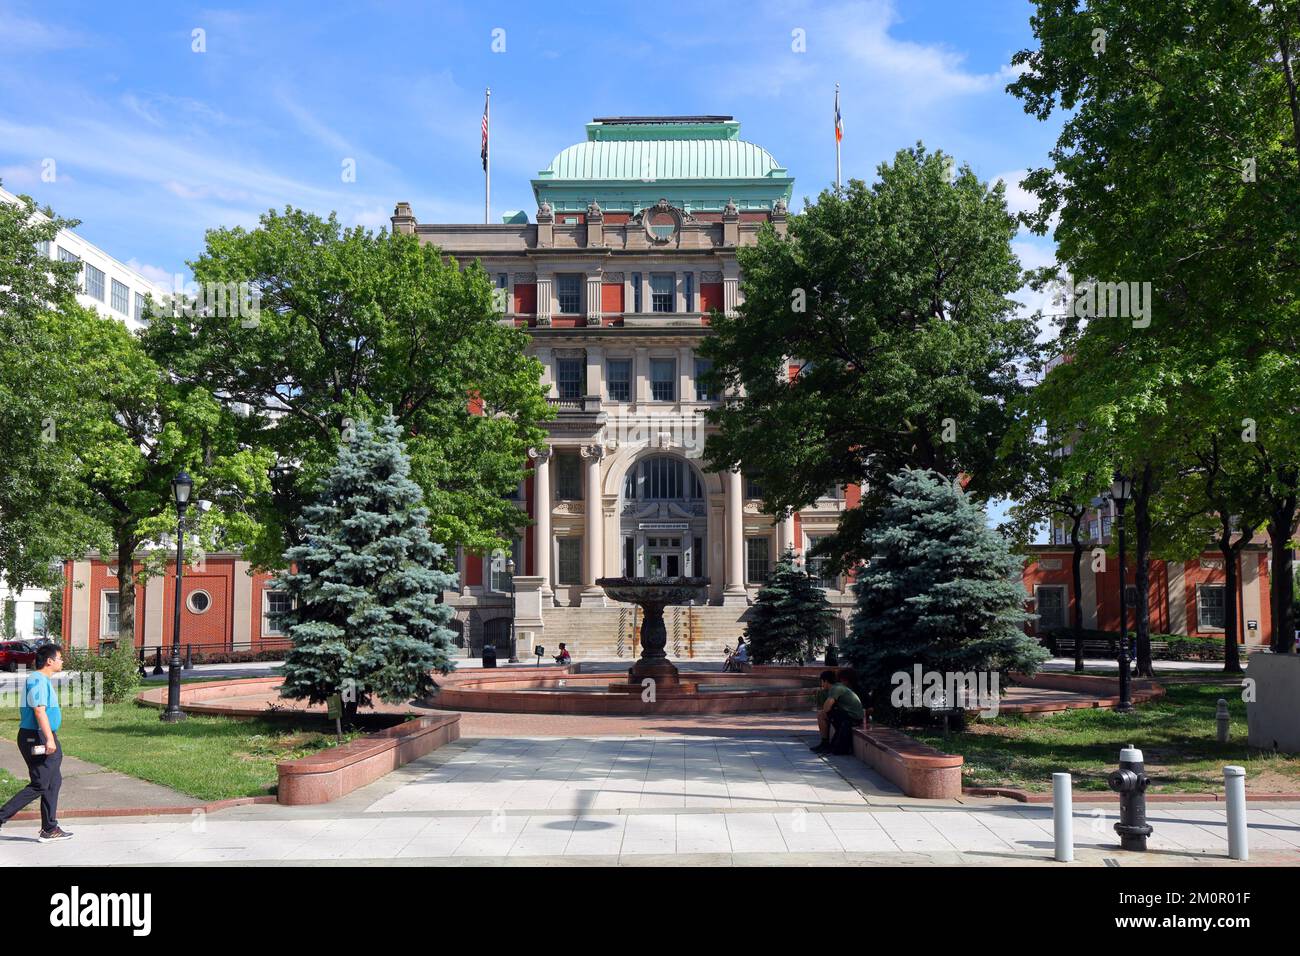 Long Island City Courthouse, 25-10 Court Square, Queens, New York. Civil Term of Queens Supreme Court in a landmark building in Long Island City. Stock Photo